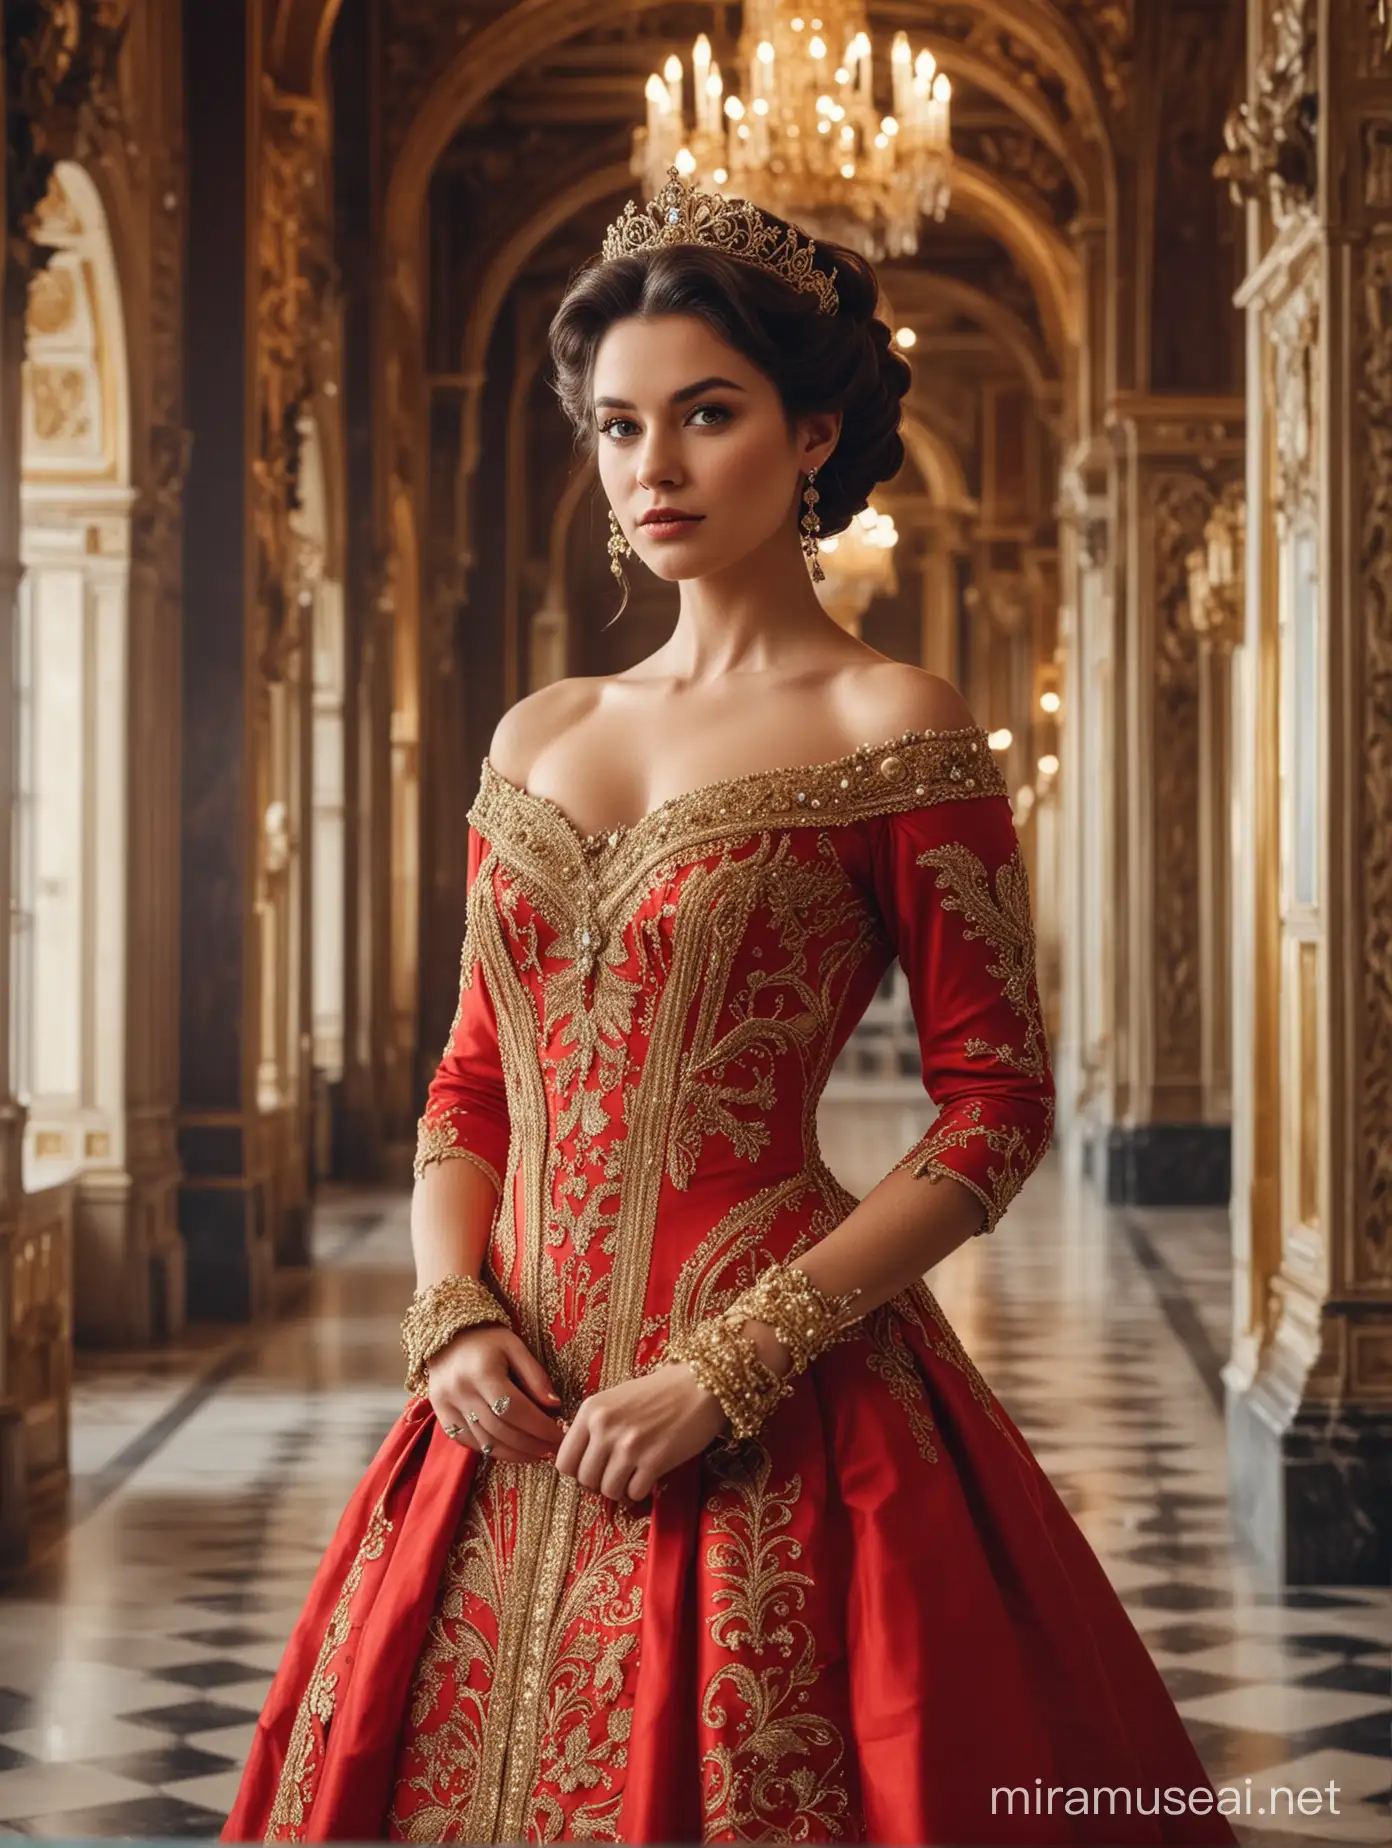 Regal Queen in Red and Gold Dress Inside Palace